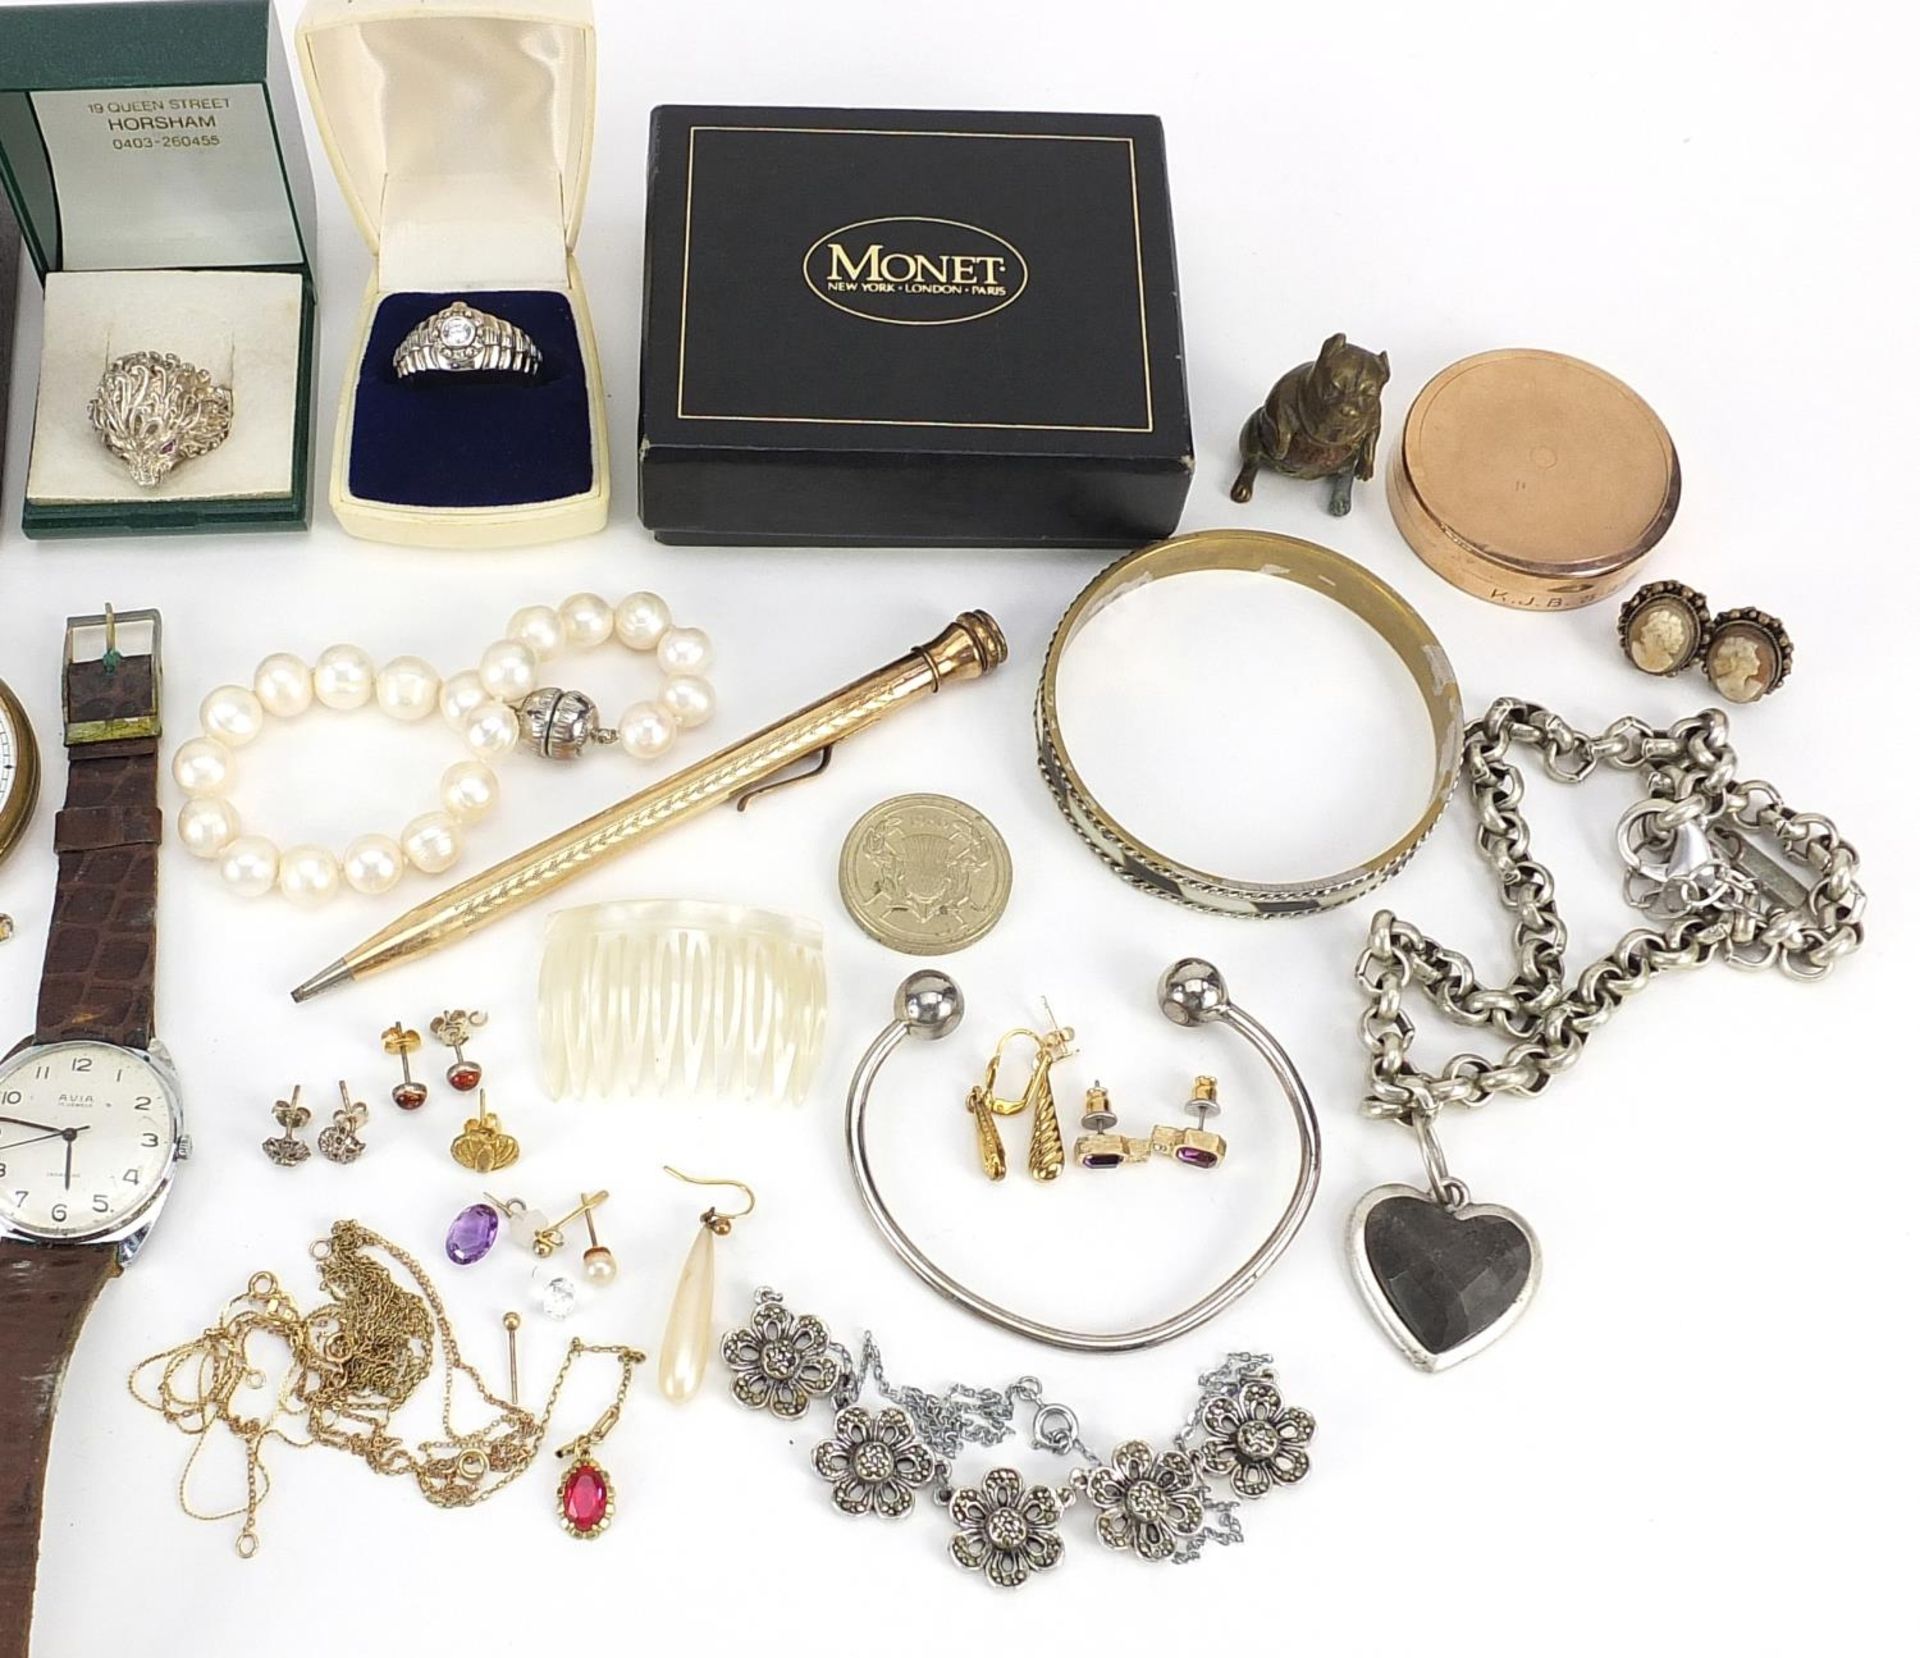 Vintage and later jewellery and watches including cultured pearls, earrings, silver rings and - Image 3 of 3